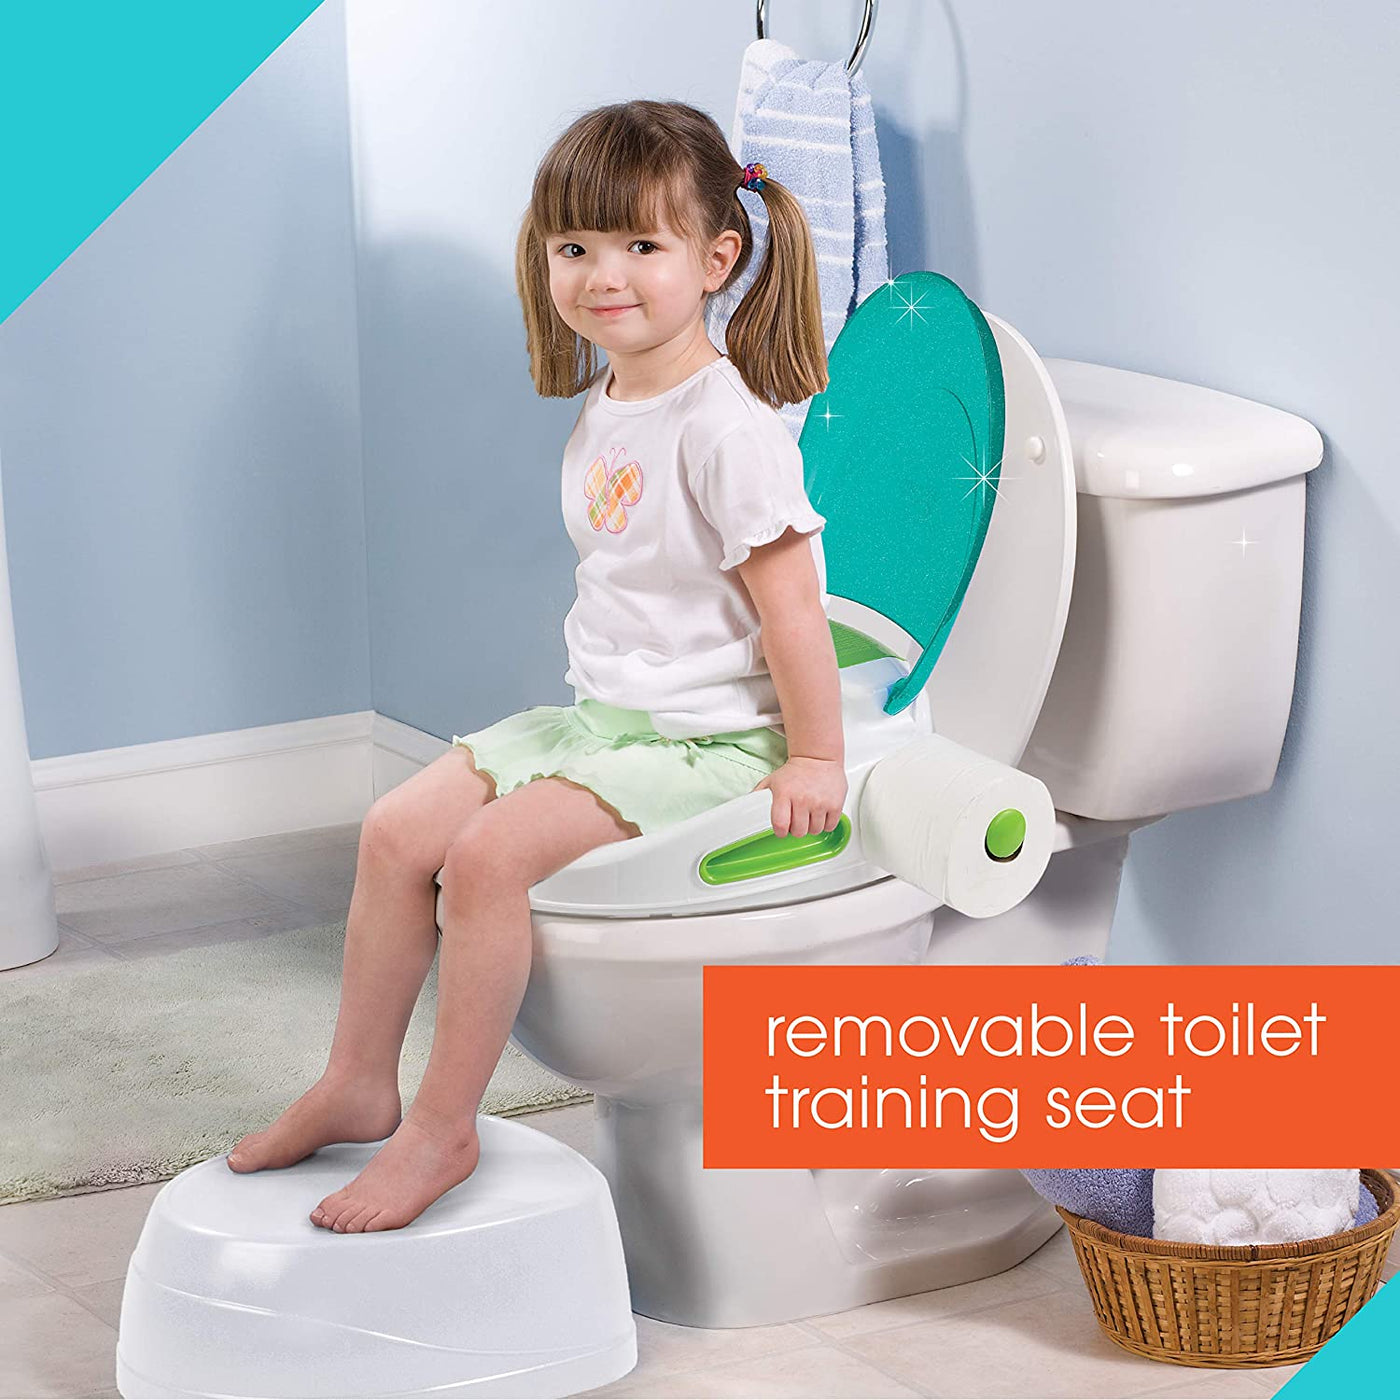 Step By Step Potty Seat | Summer Infant